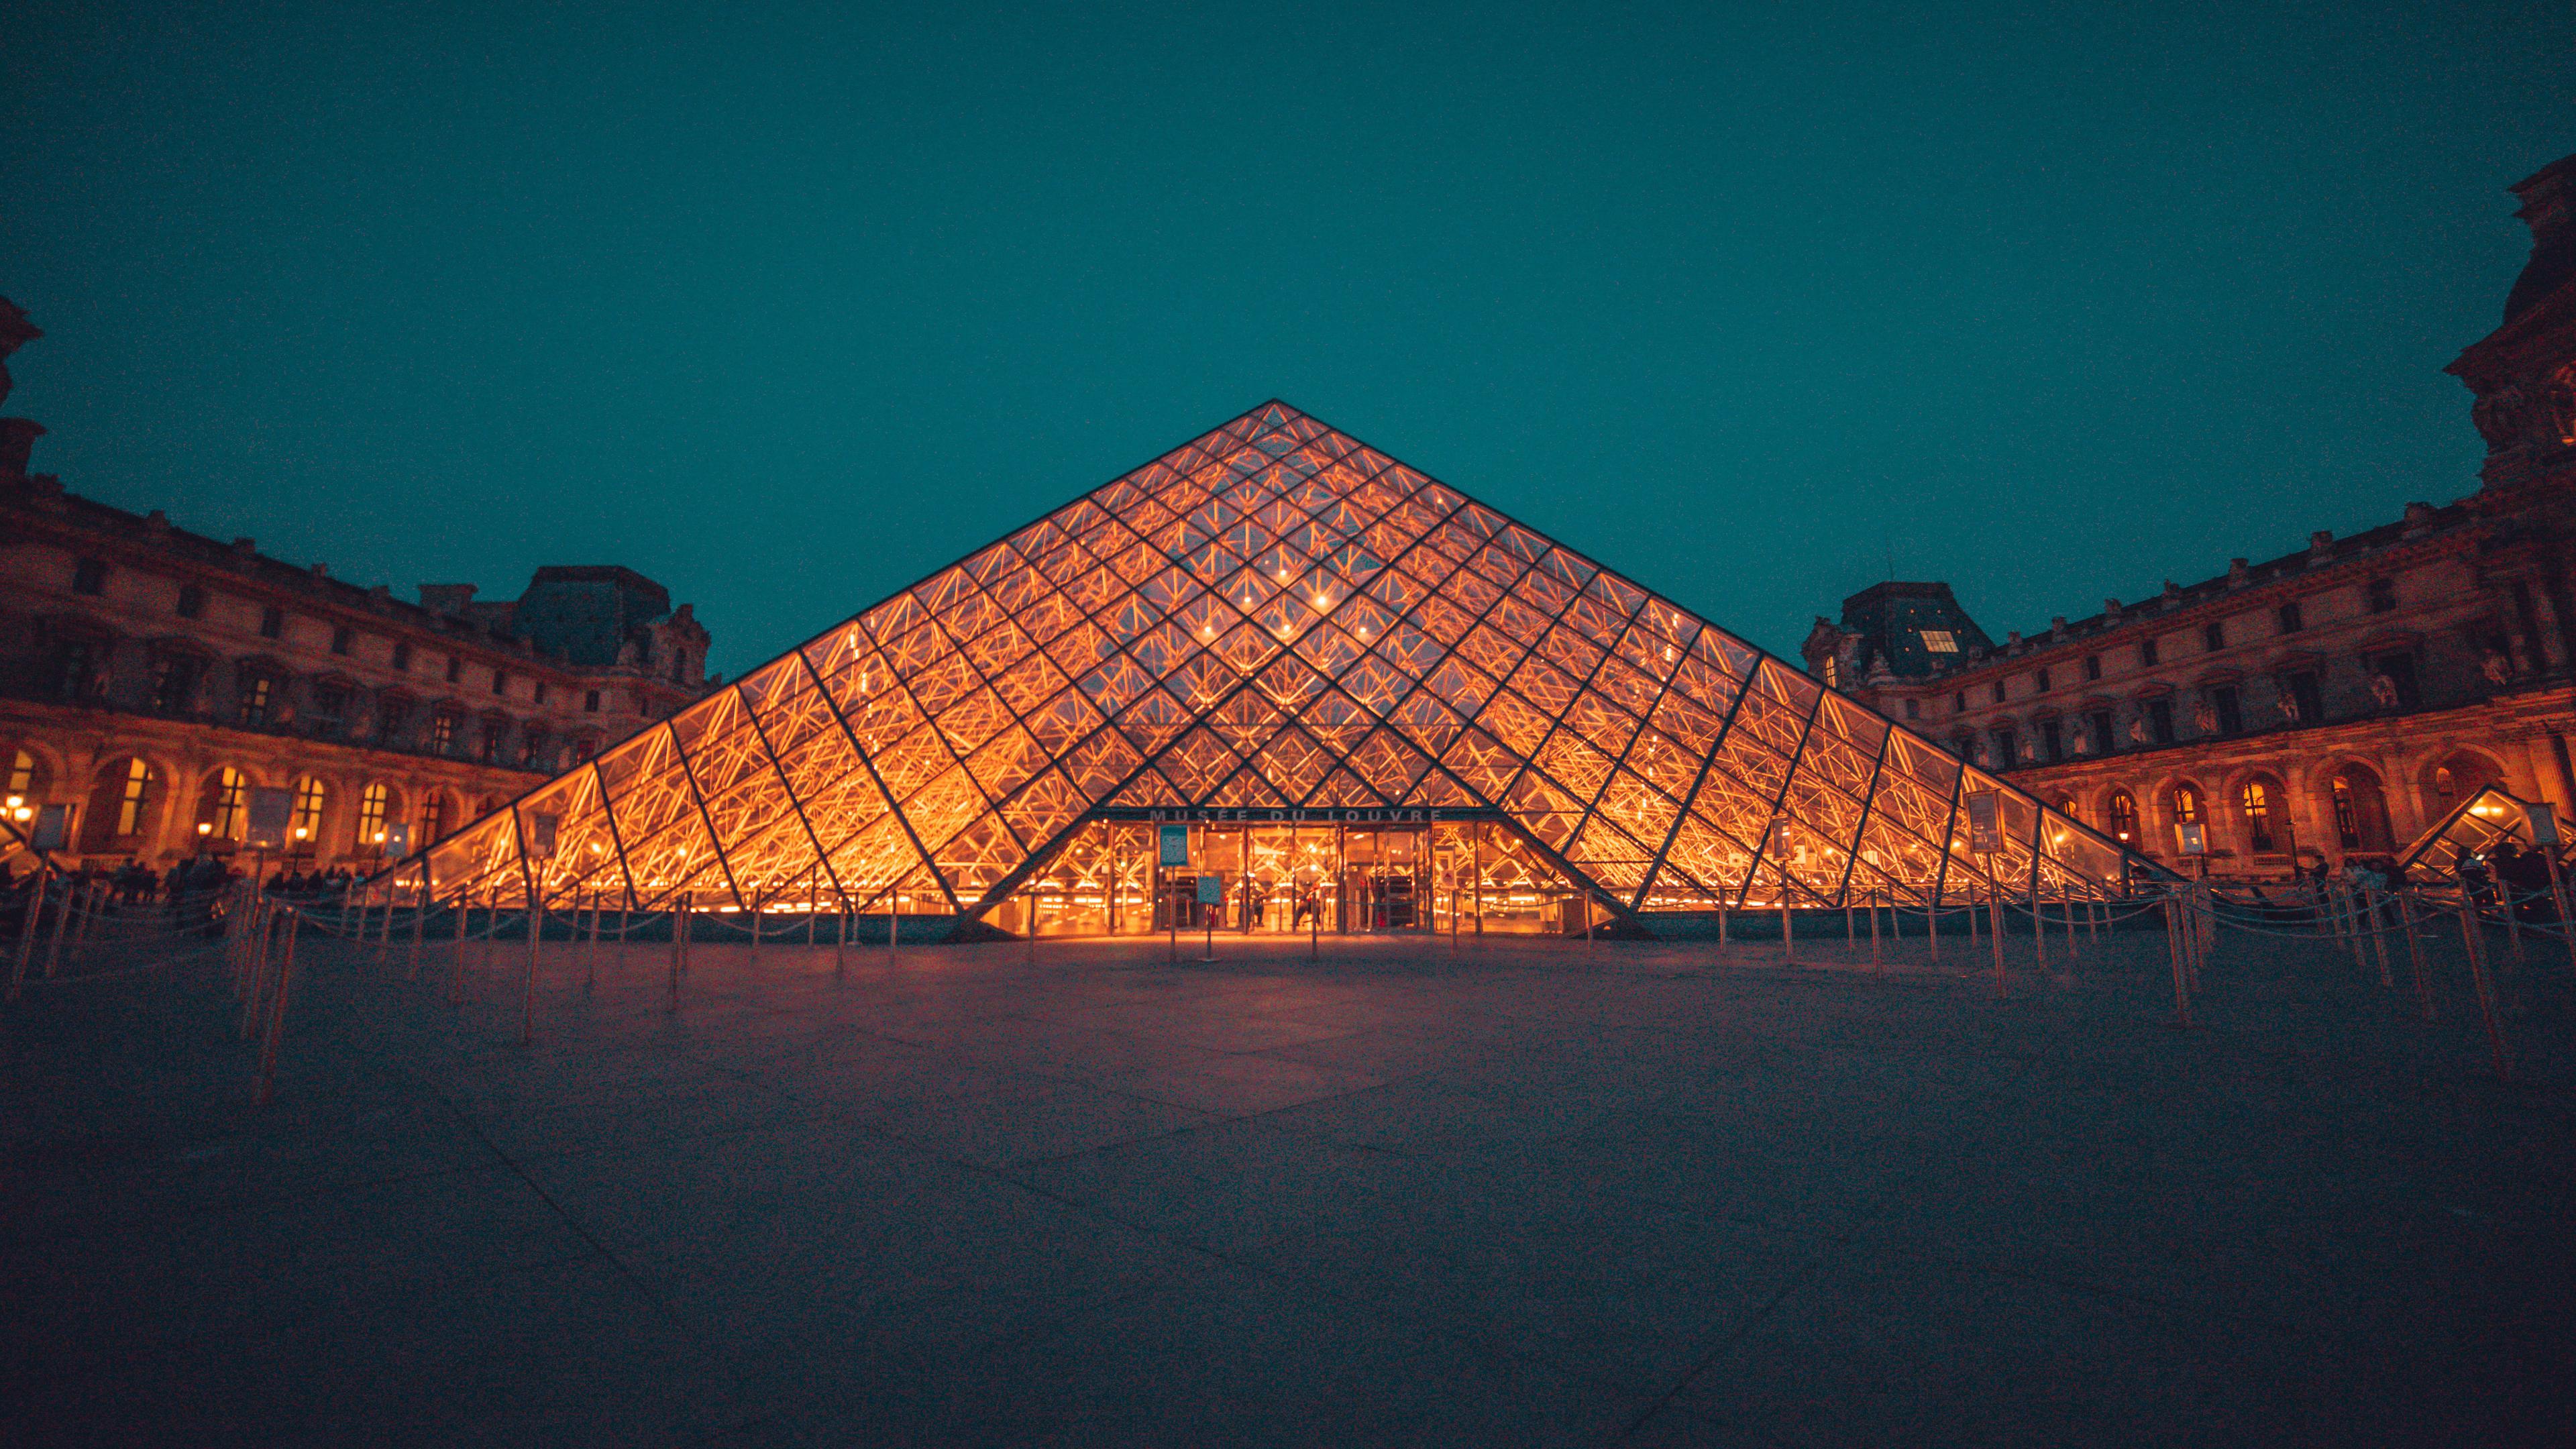 Louvre 4K wallpaper for your desktop or mobile screen free and easy to download